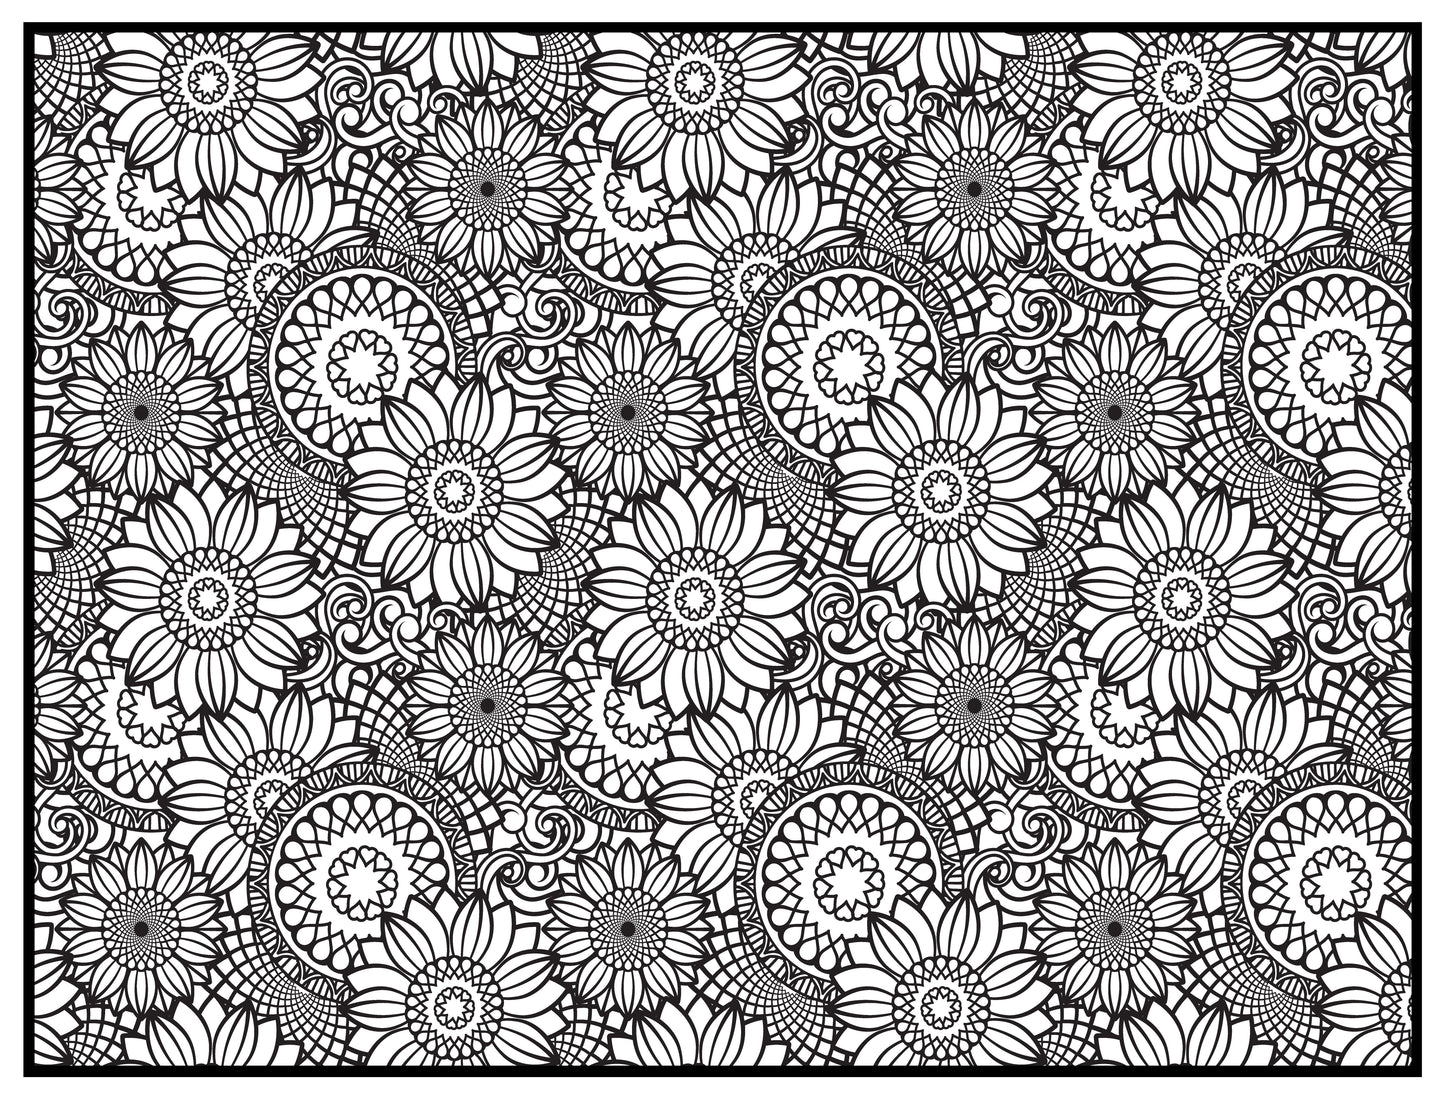 Background 49 Custom Personalized Giant Coloring Poster 46"x60"